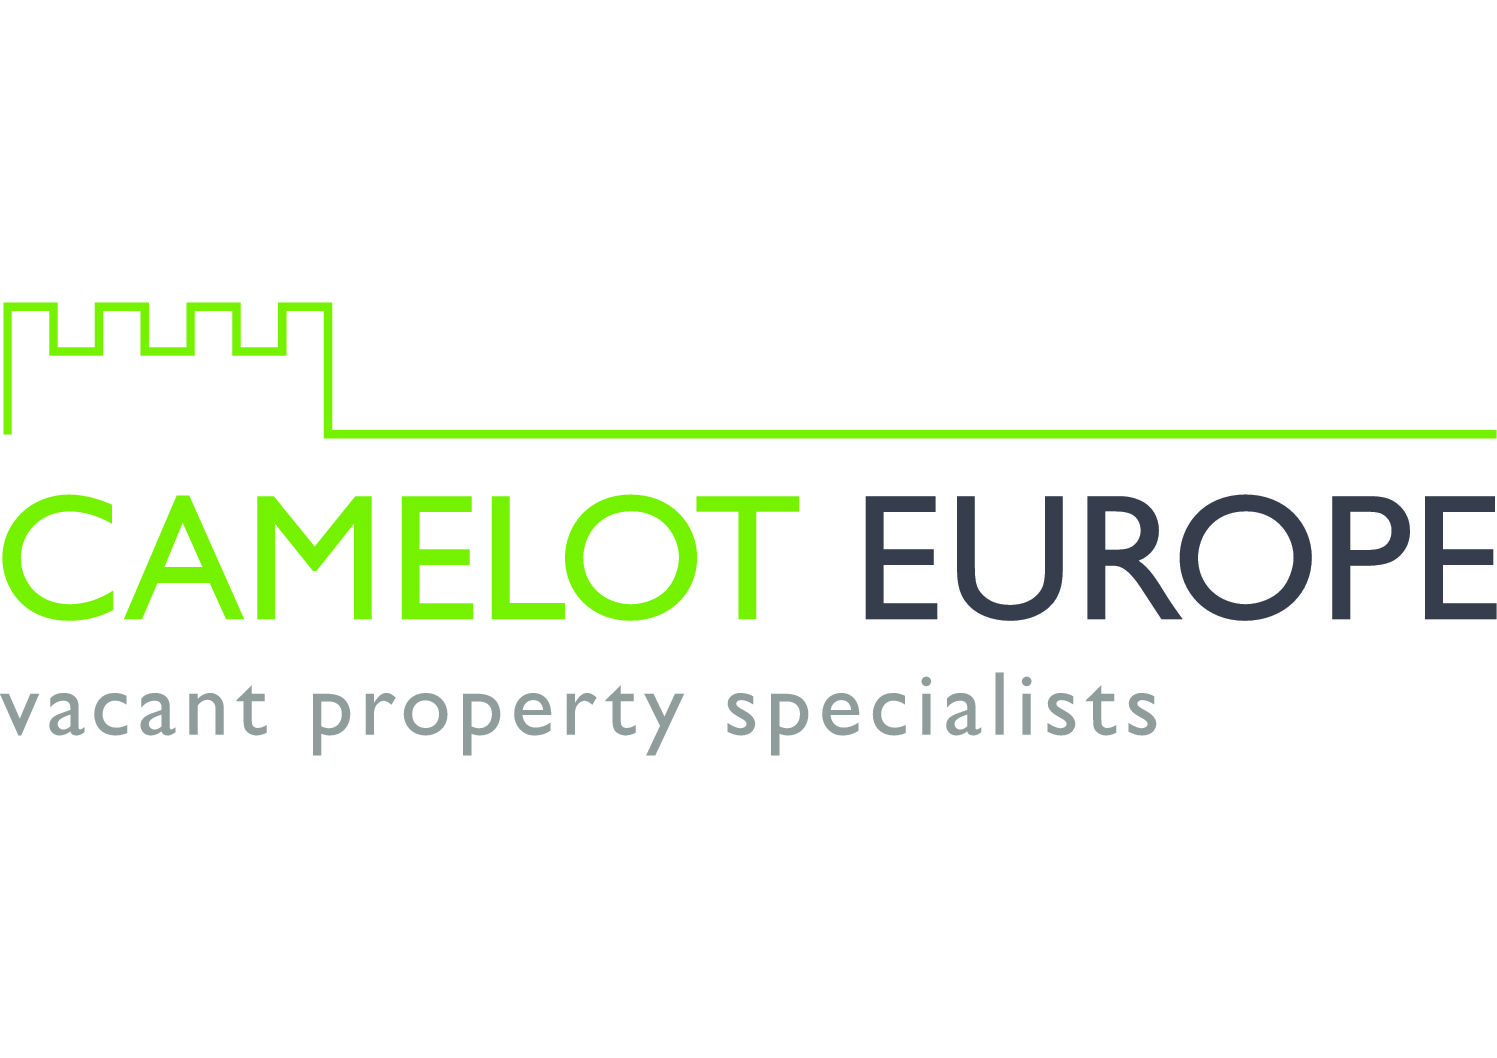 Camelot Europe